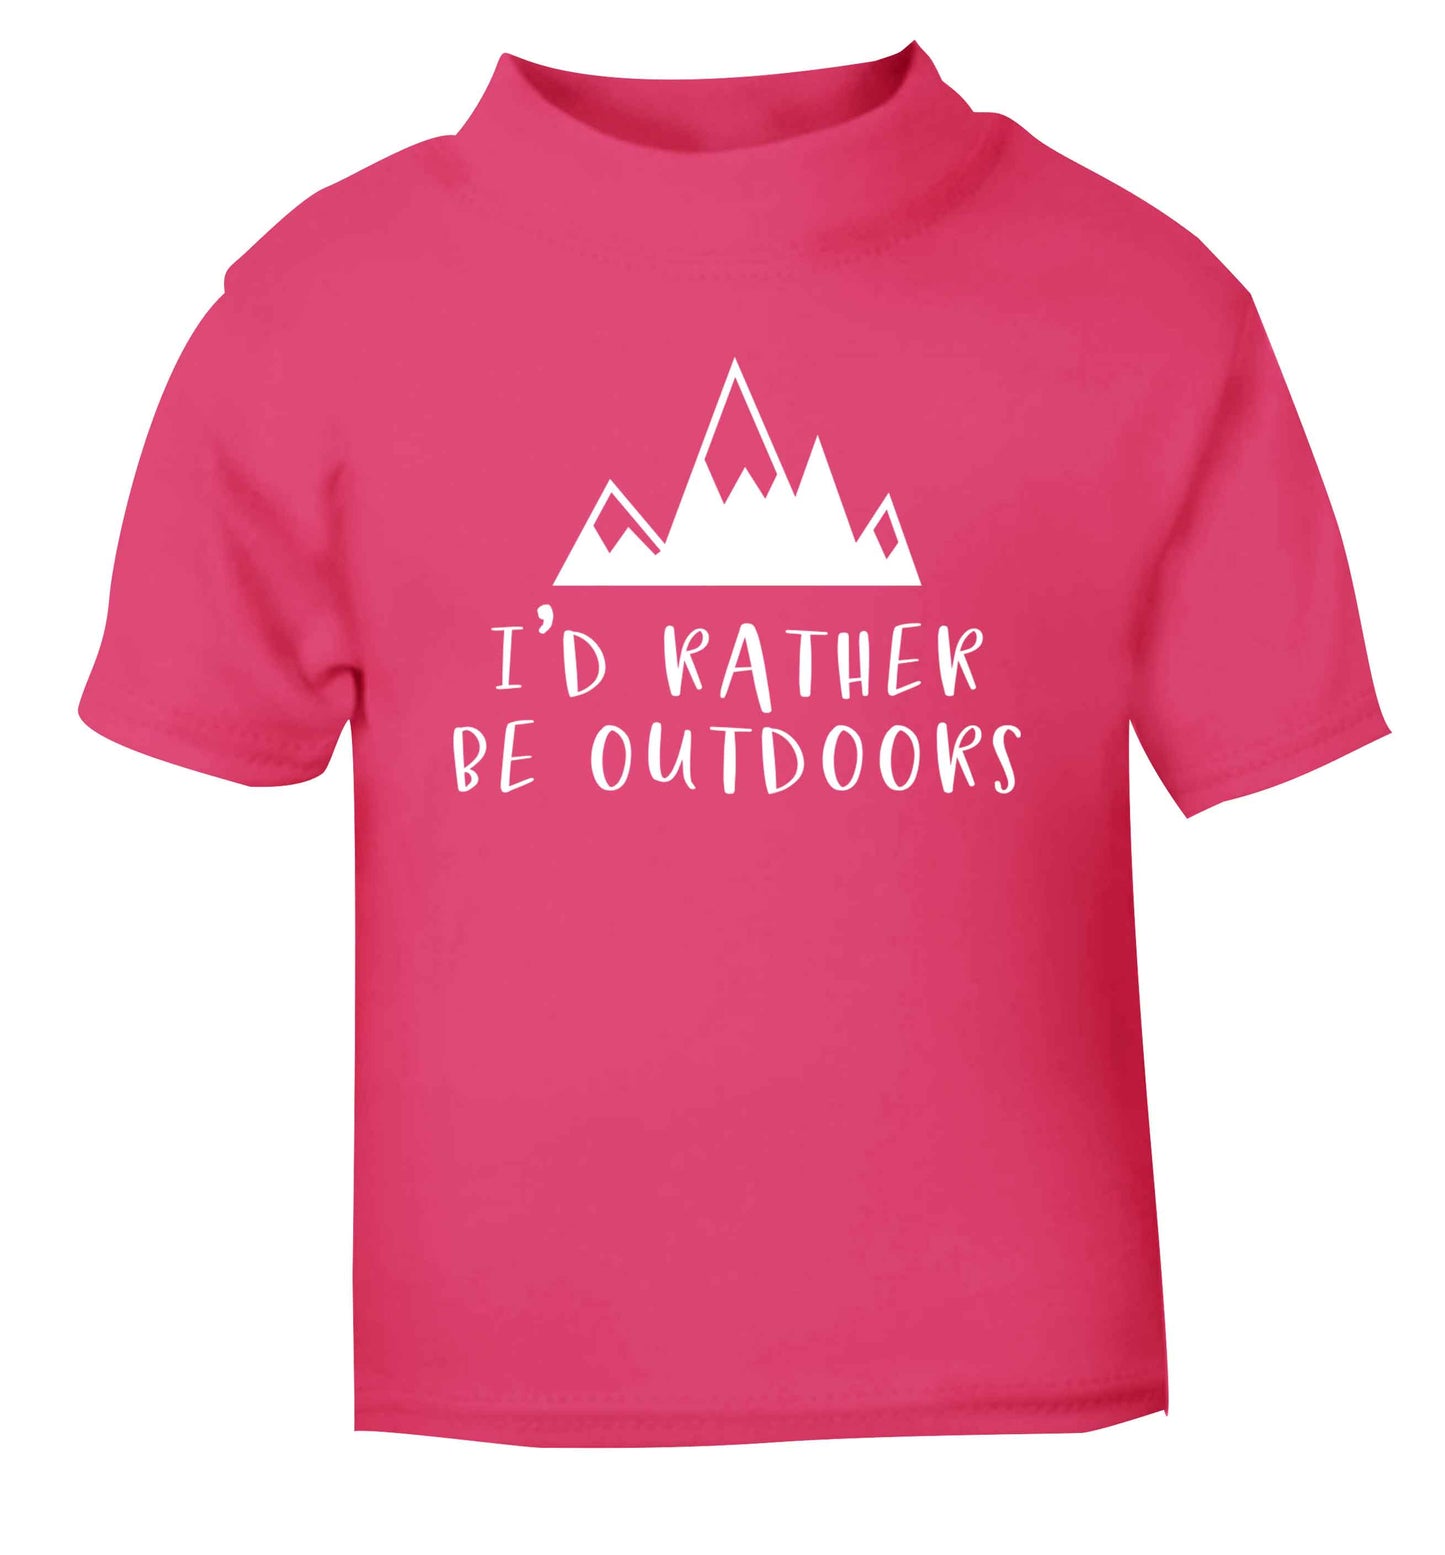 I'd rather be outdoors pink Baby Toddler Tshirt 2 Years